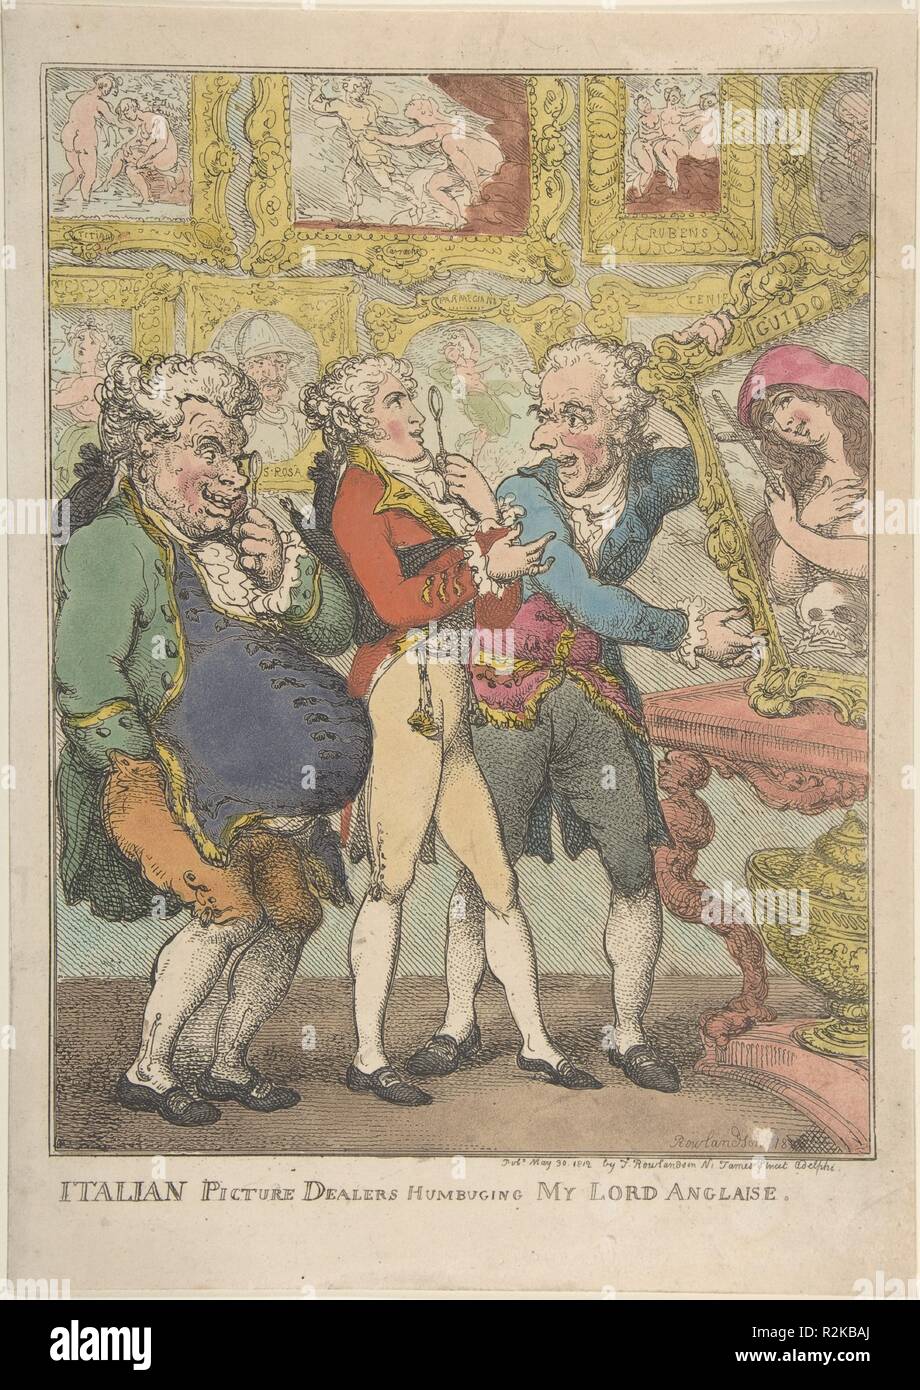 Italian Picture Dealers Humbugging My Lord Anglaise. Artist and publisher: Thomas Rowlandson (British, London 1757-1827 London). Dimensions: Sheet: 13 11/16 x 9 3/4 in. (34.8 x 24.8 cm). Date: May 30, 1812.  A handsome English lord visiting Italy is introduced to a disreputable art dealer by an obese nobleman. The grimaces and gestures of the Italians suggest that they intend to defraud, or 'humbug,' the tourist. A voluptuous Mary Magdalene, purportedly by Guido Reni, is propped on a table for inspection and all the works on display undoubtedly are copies. When this print was published in 1812 Stock Photo